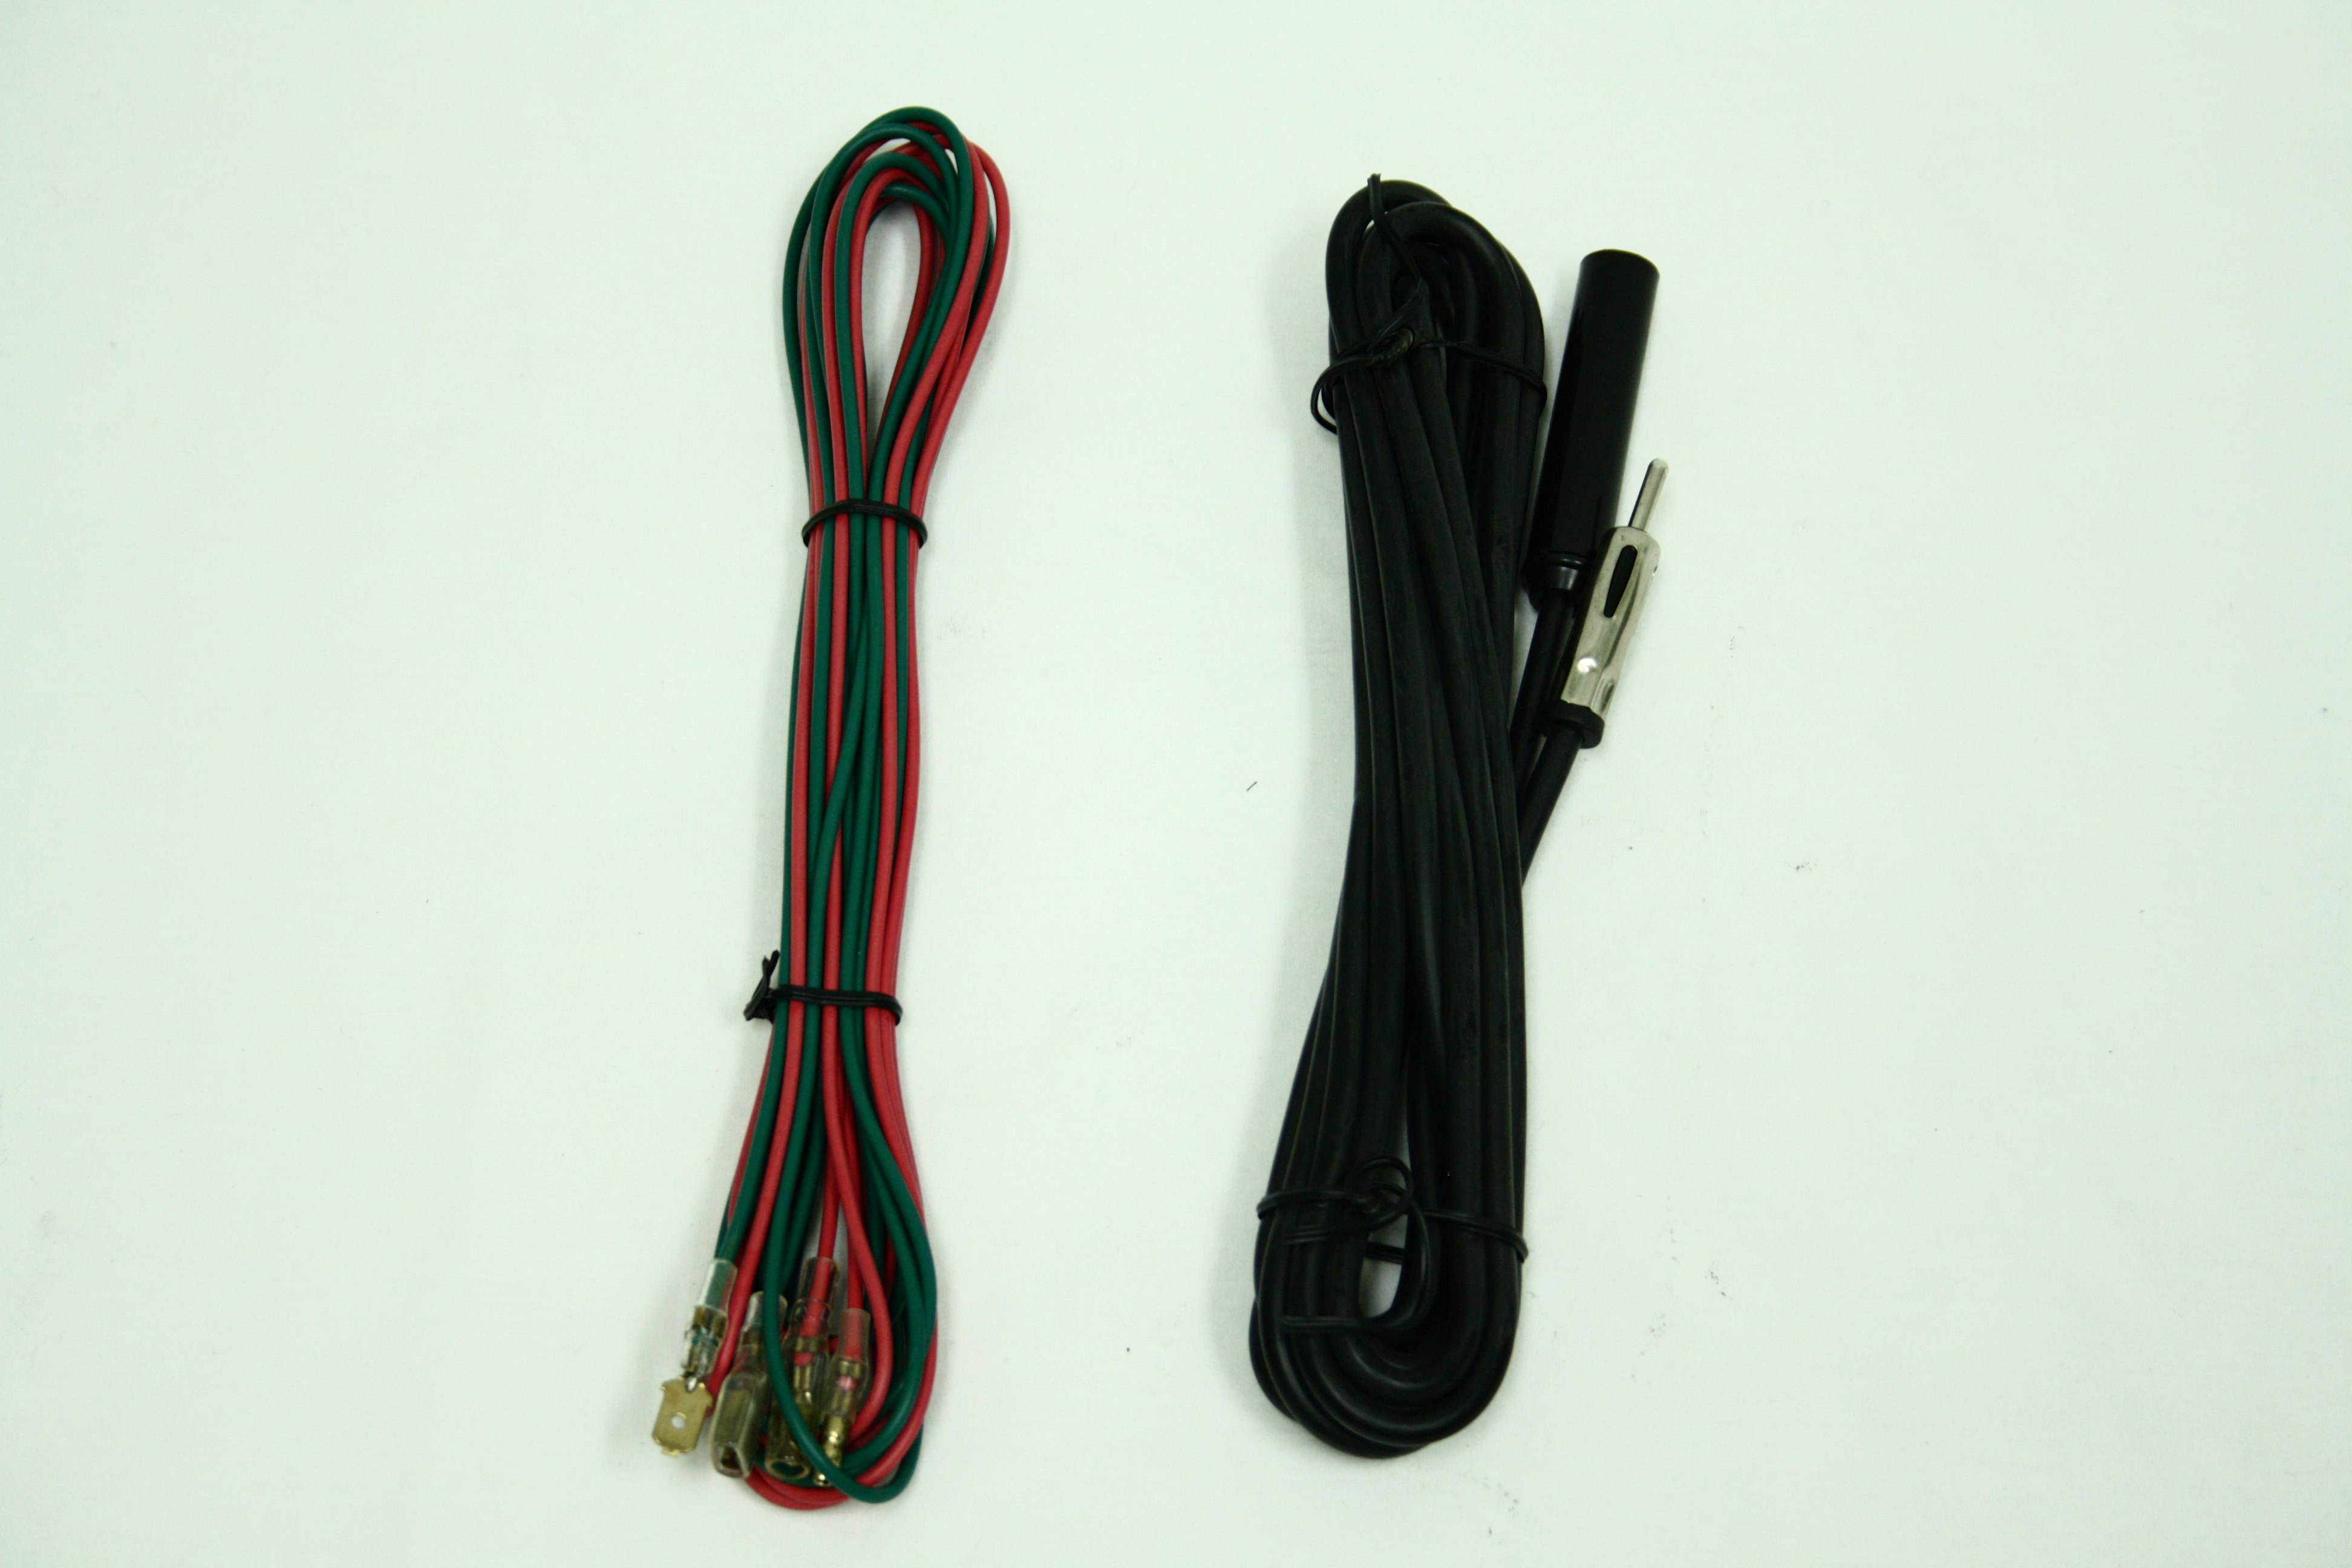 1968-1982 Corvette Power Antenna Extension Cable Kit for Rear Installation